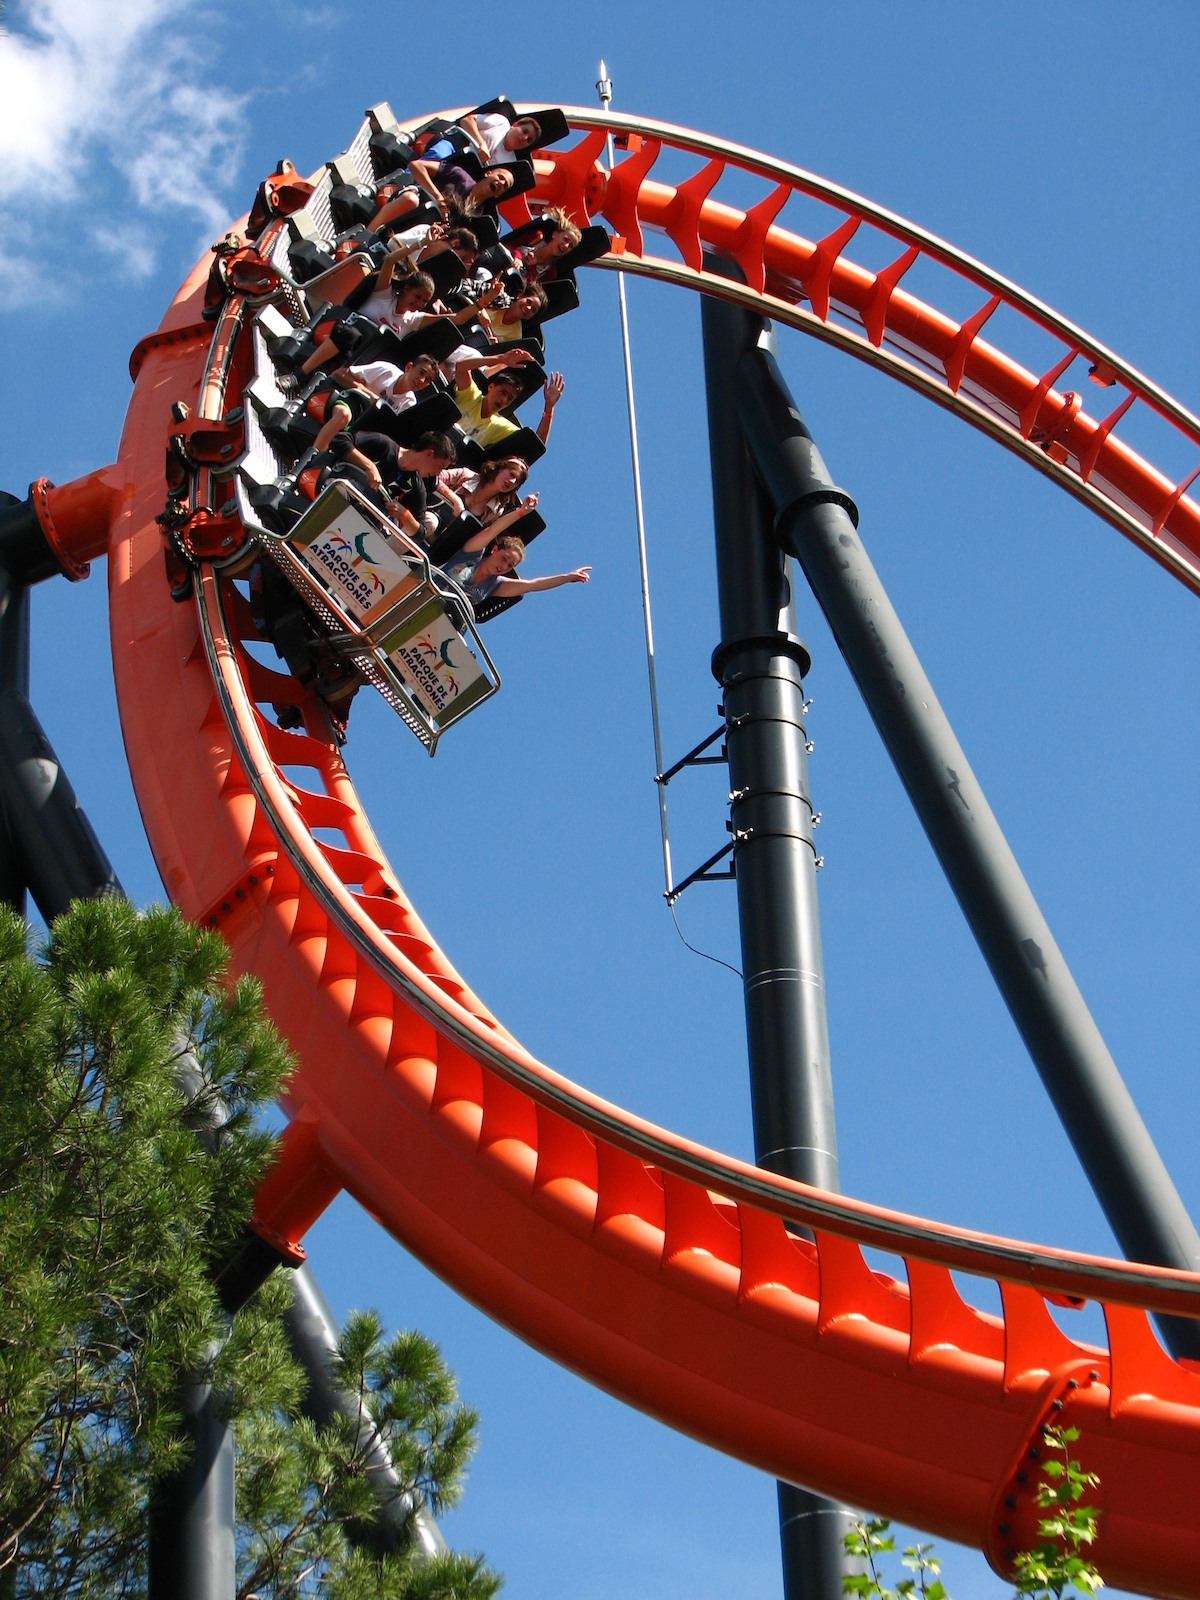 People riding a red roller coaster